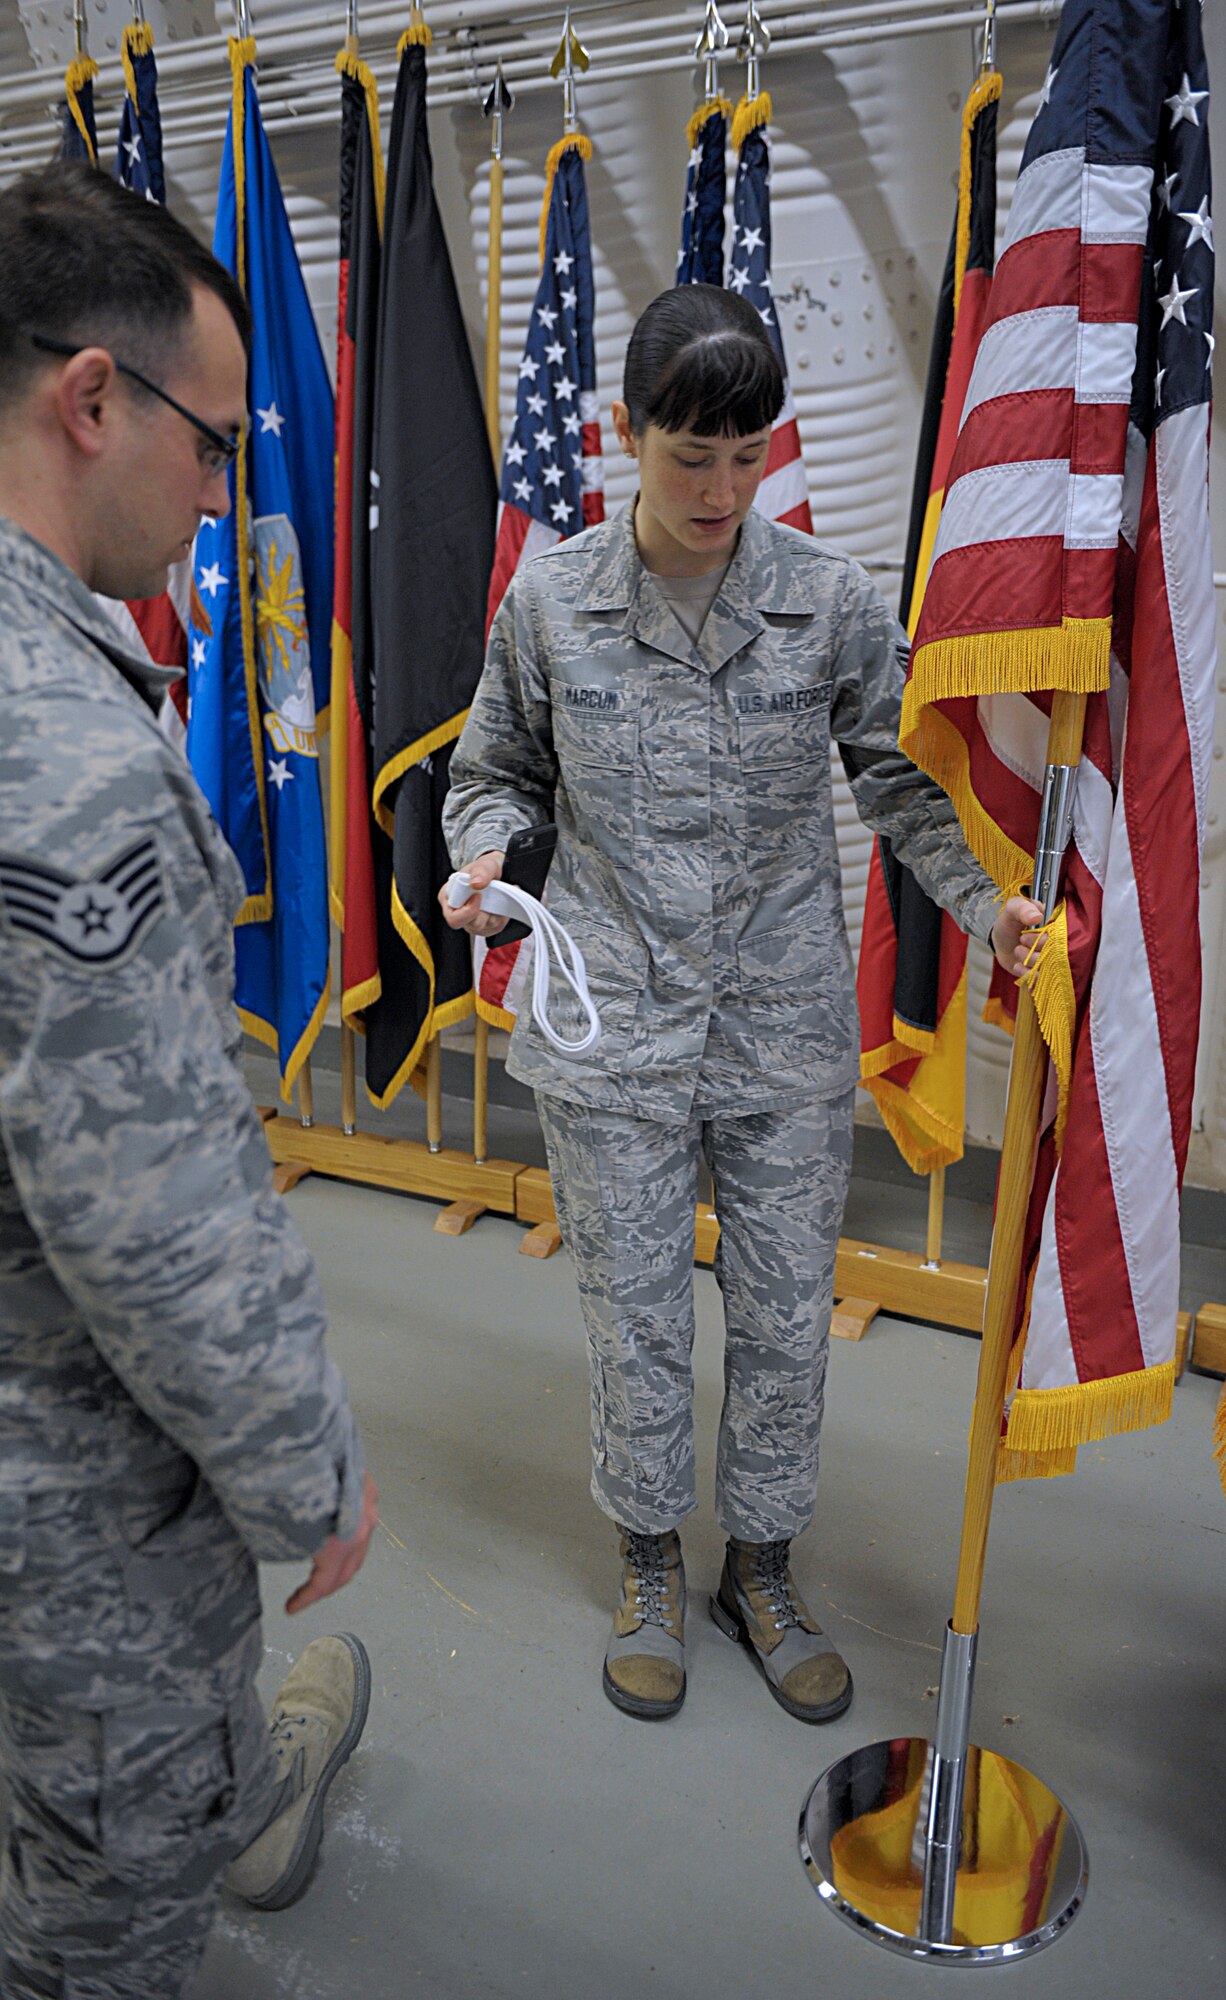 Senior Airman Amber Marcum, U.S. Air Force Honor Guard base honor guard program coordinator, discusses ways to display flags with Staff Sgt. Casey Chillemi, 86th Munitions Squadron munitions controller, March 15, 2016, at Ramstein Air Base, Germany. Chillemi and other members of the Ramstein Honor Guard learned skills and techniques from U.S. Air Force Honor Guard members to become better honor guardsmen. (U.S. Air Force photo/Staff Sgt. Timothy Moore)